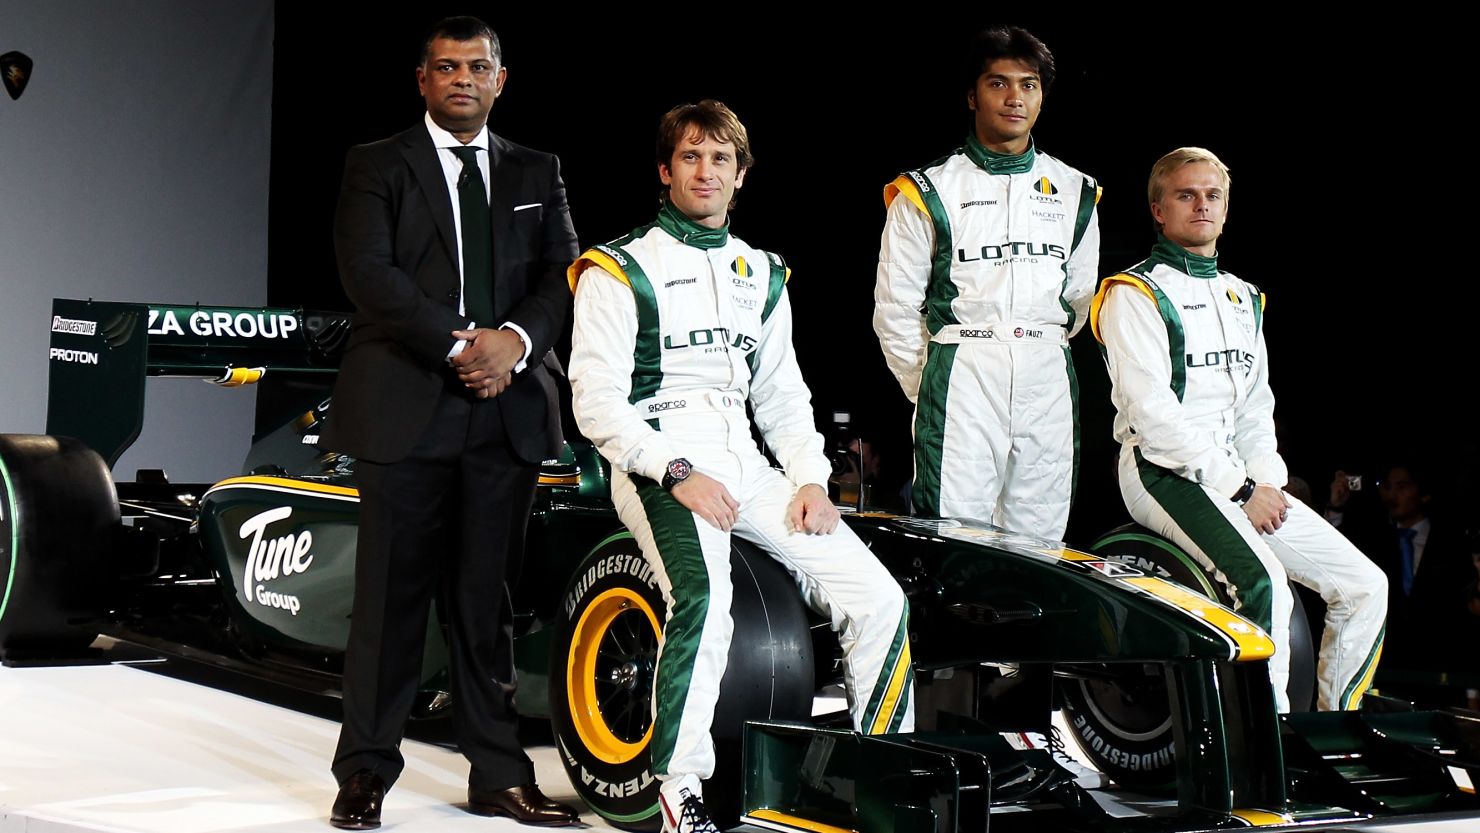 Team Lotus will have the experience of Steve Nielsen in their set-up next season.